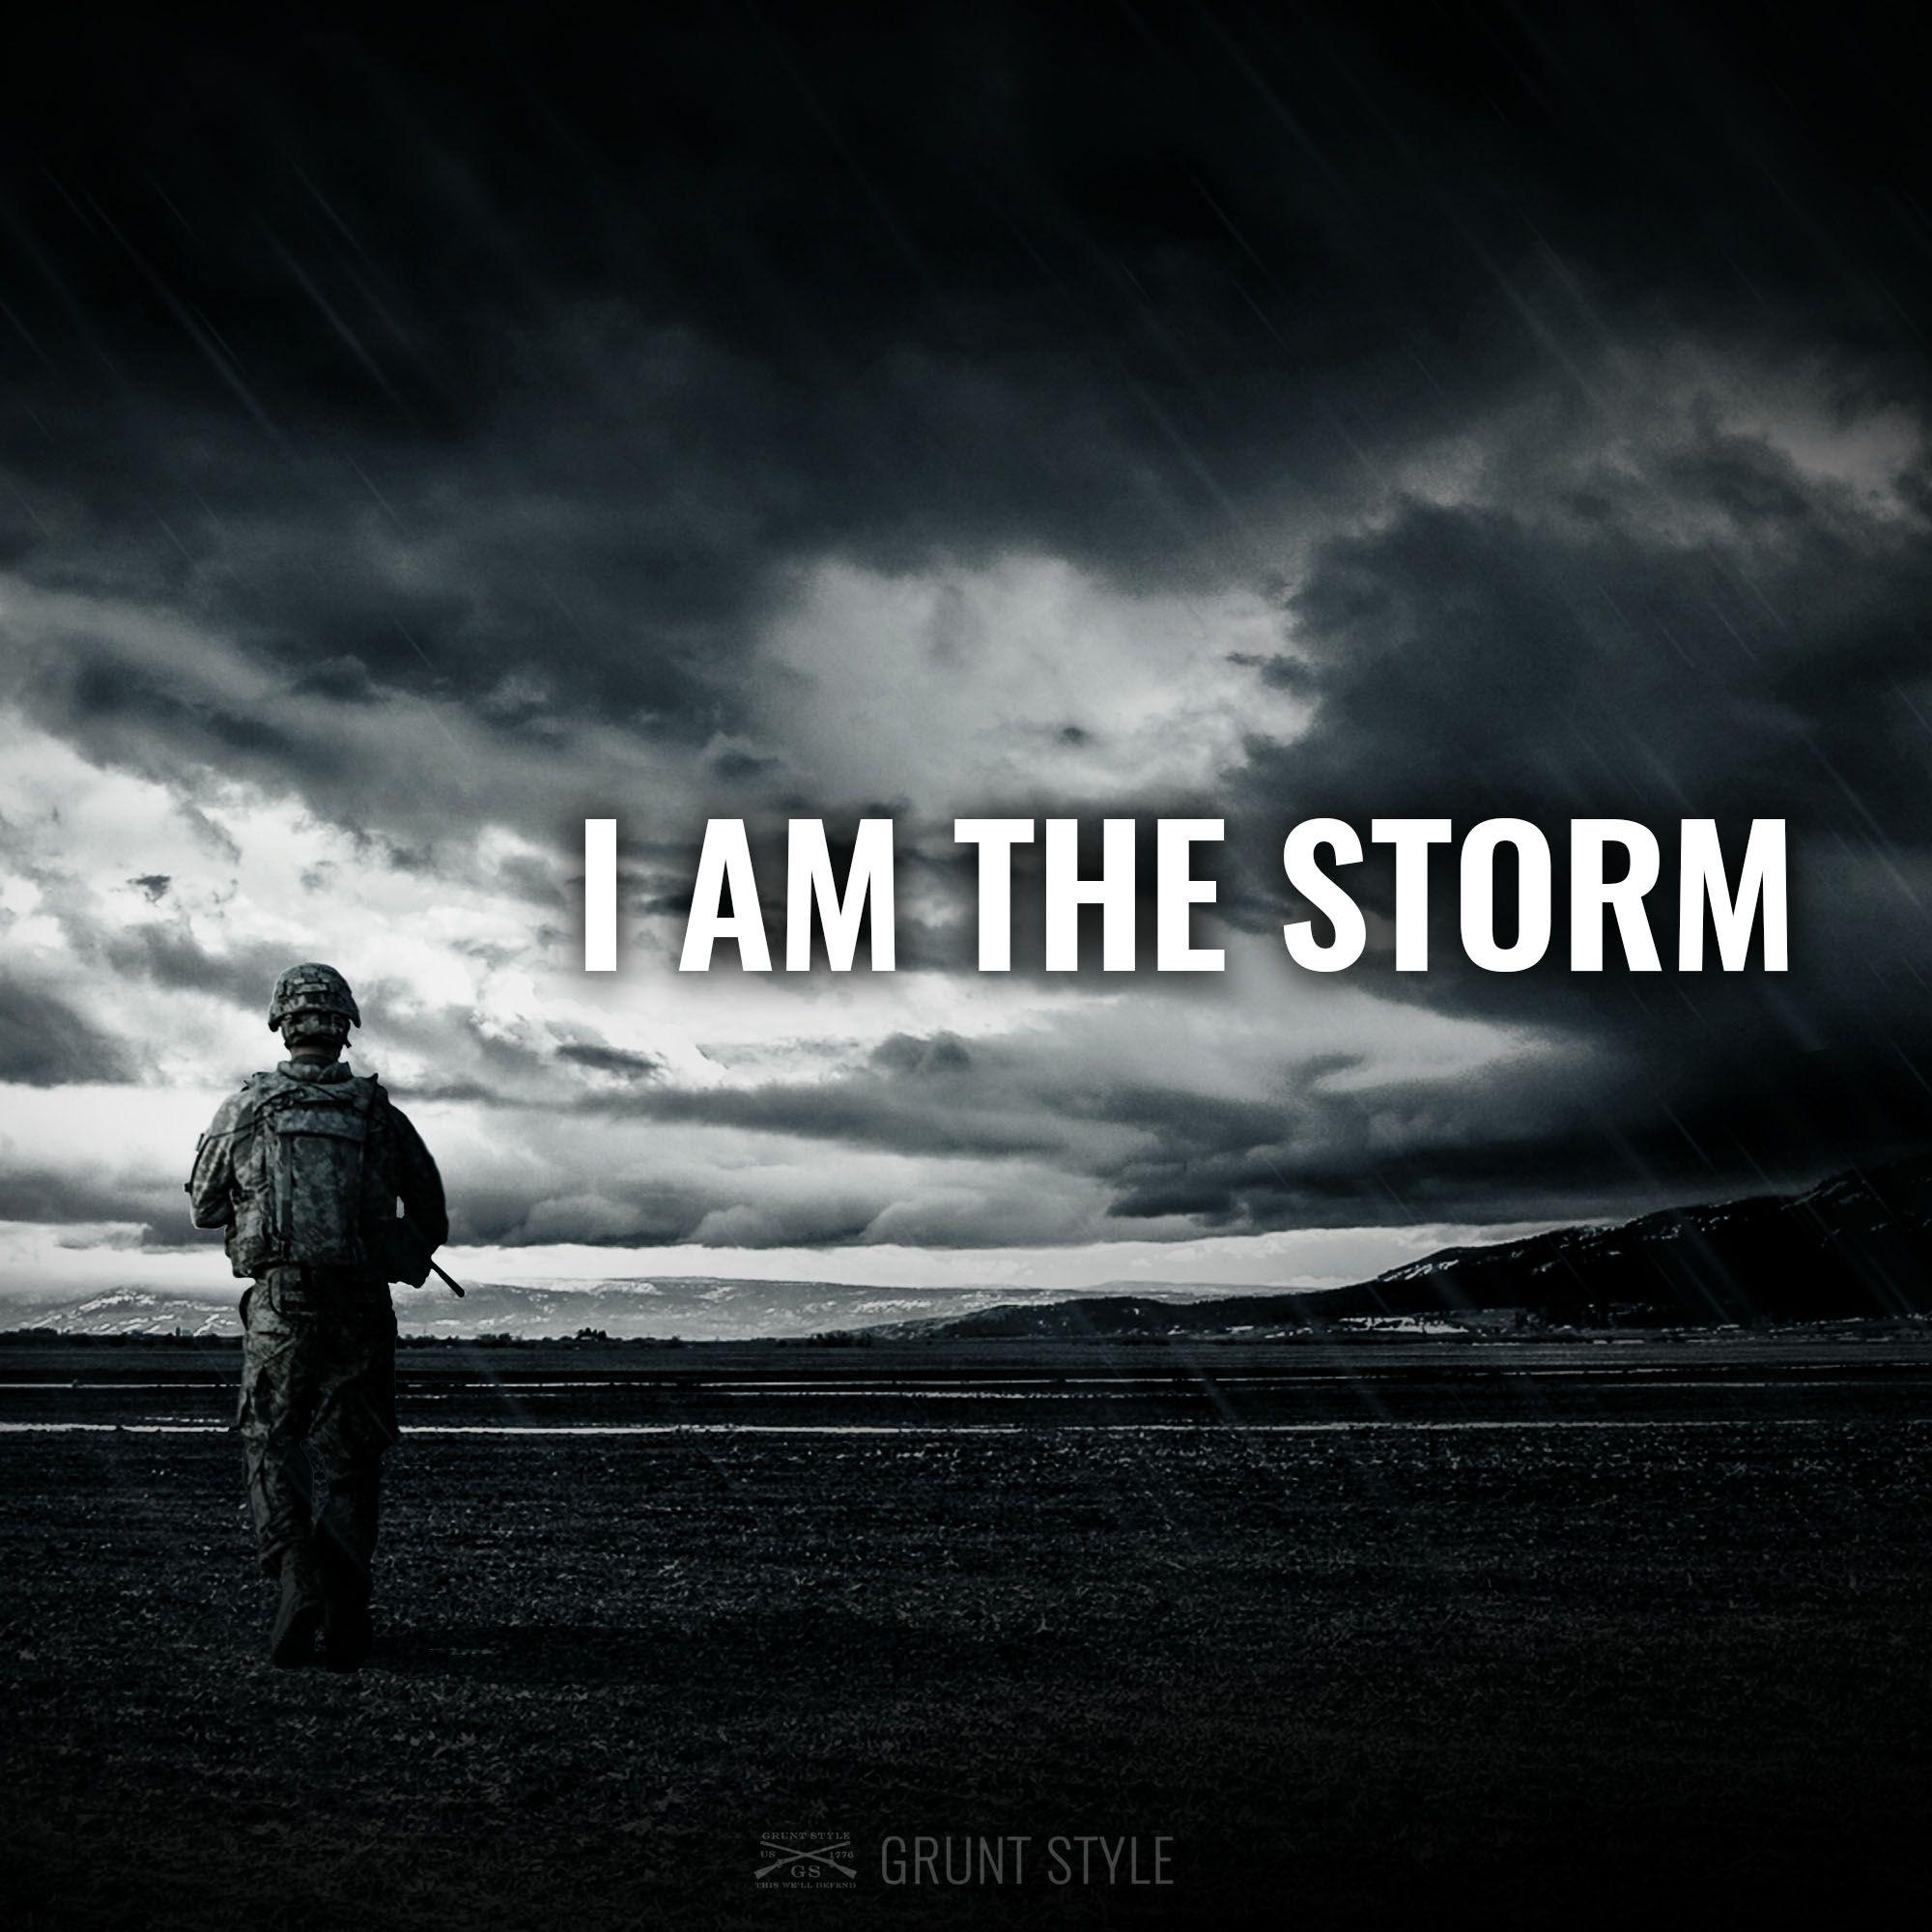 I AM THE STORM #motivation #military #america. Army quotes, Navy